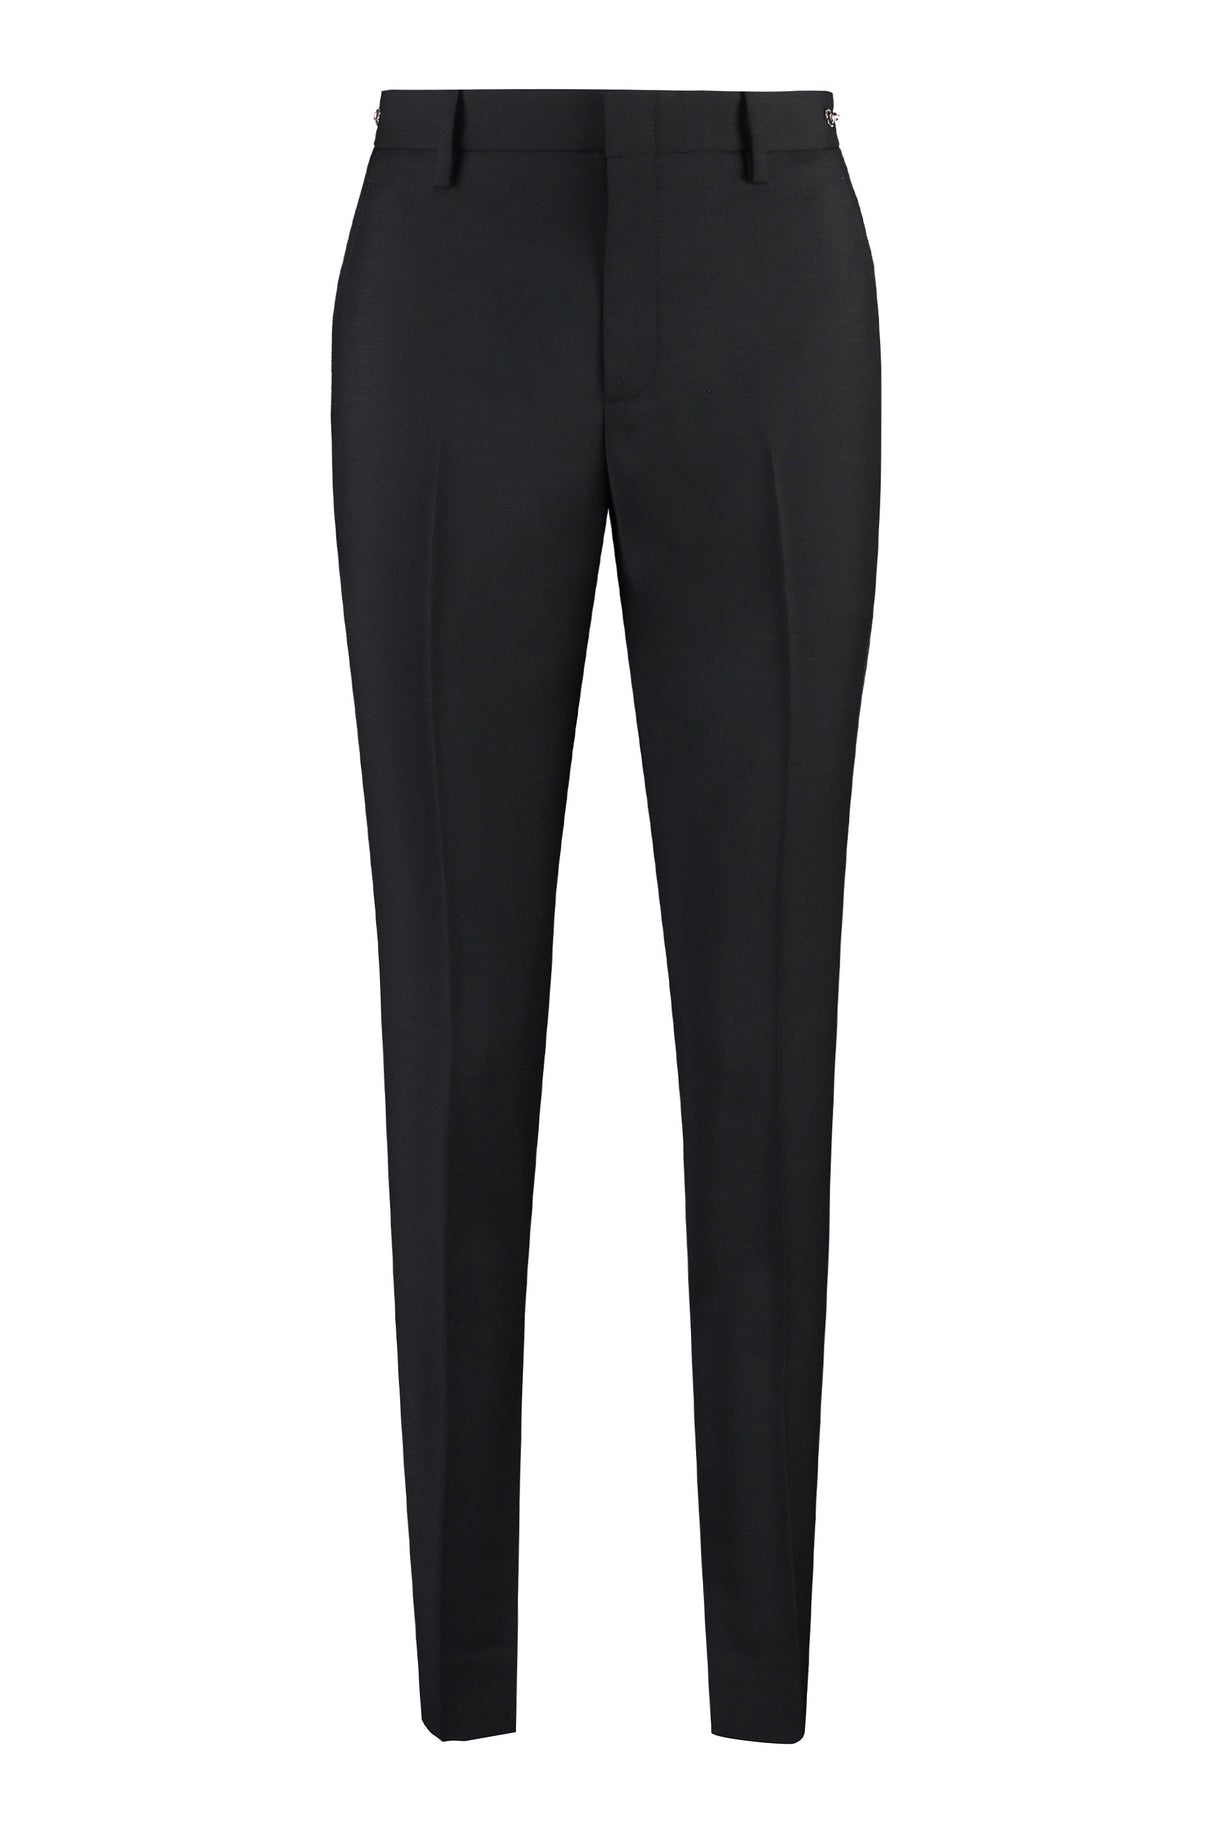 GUCCI Black Wool Blend Trousers for Women